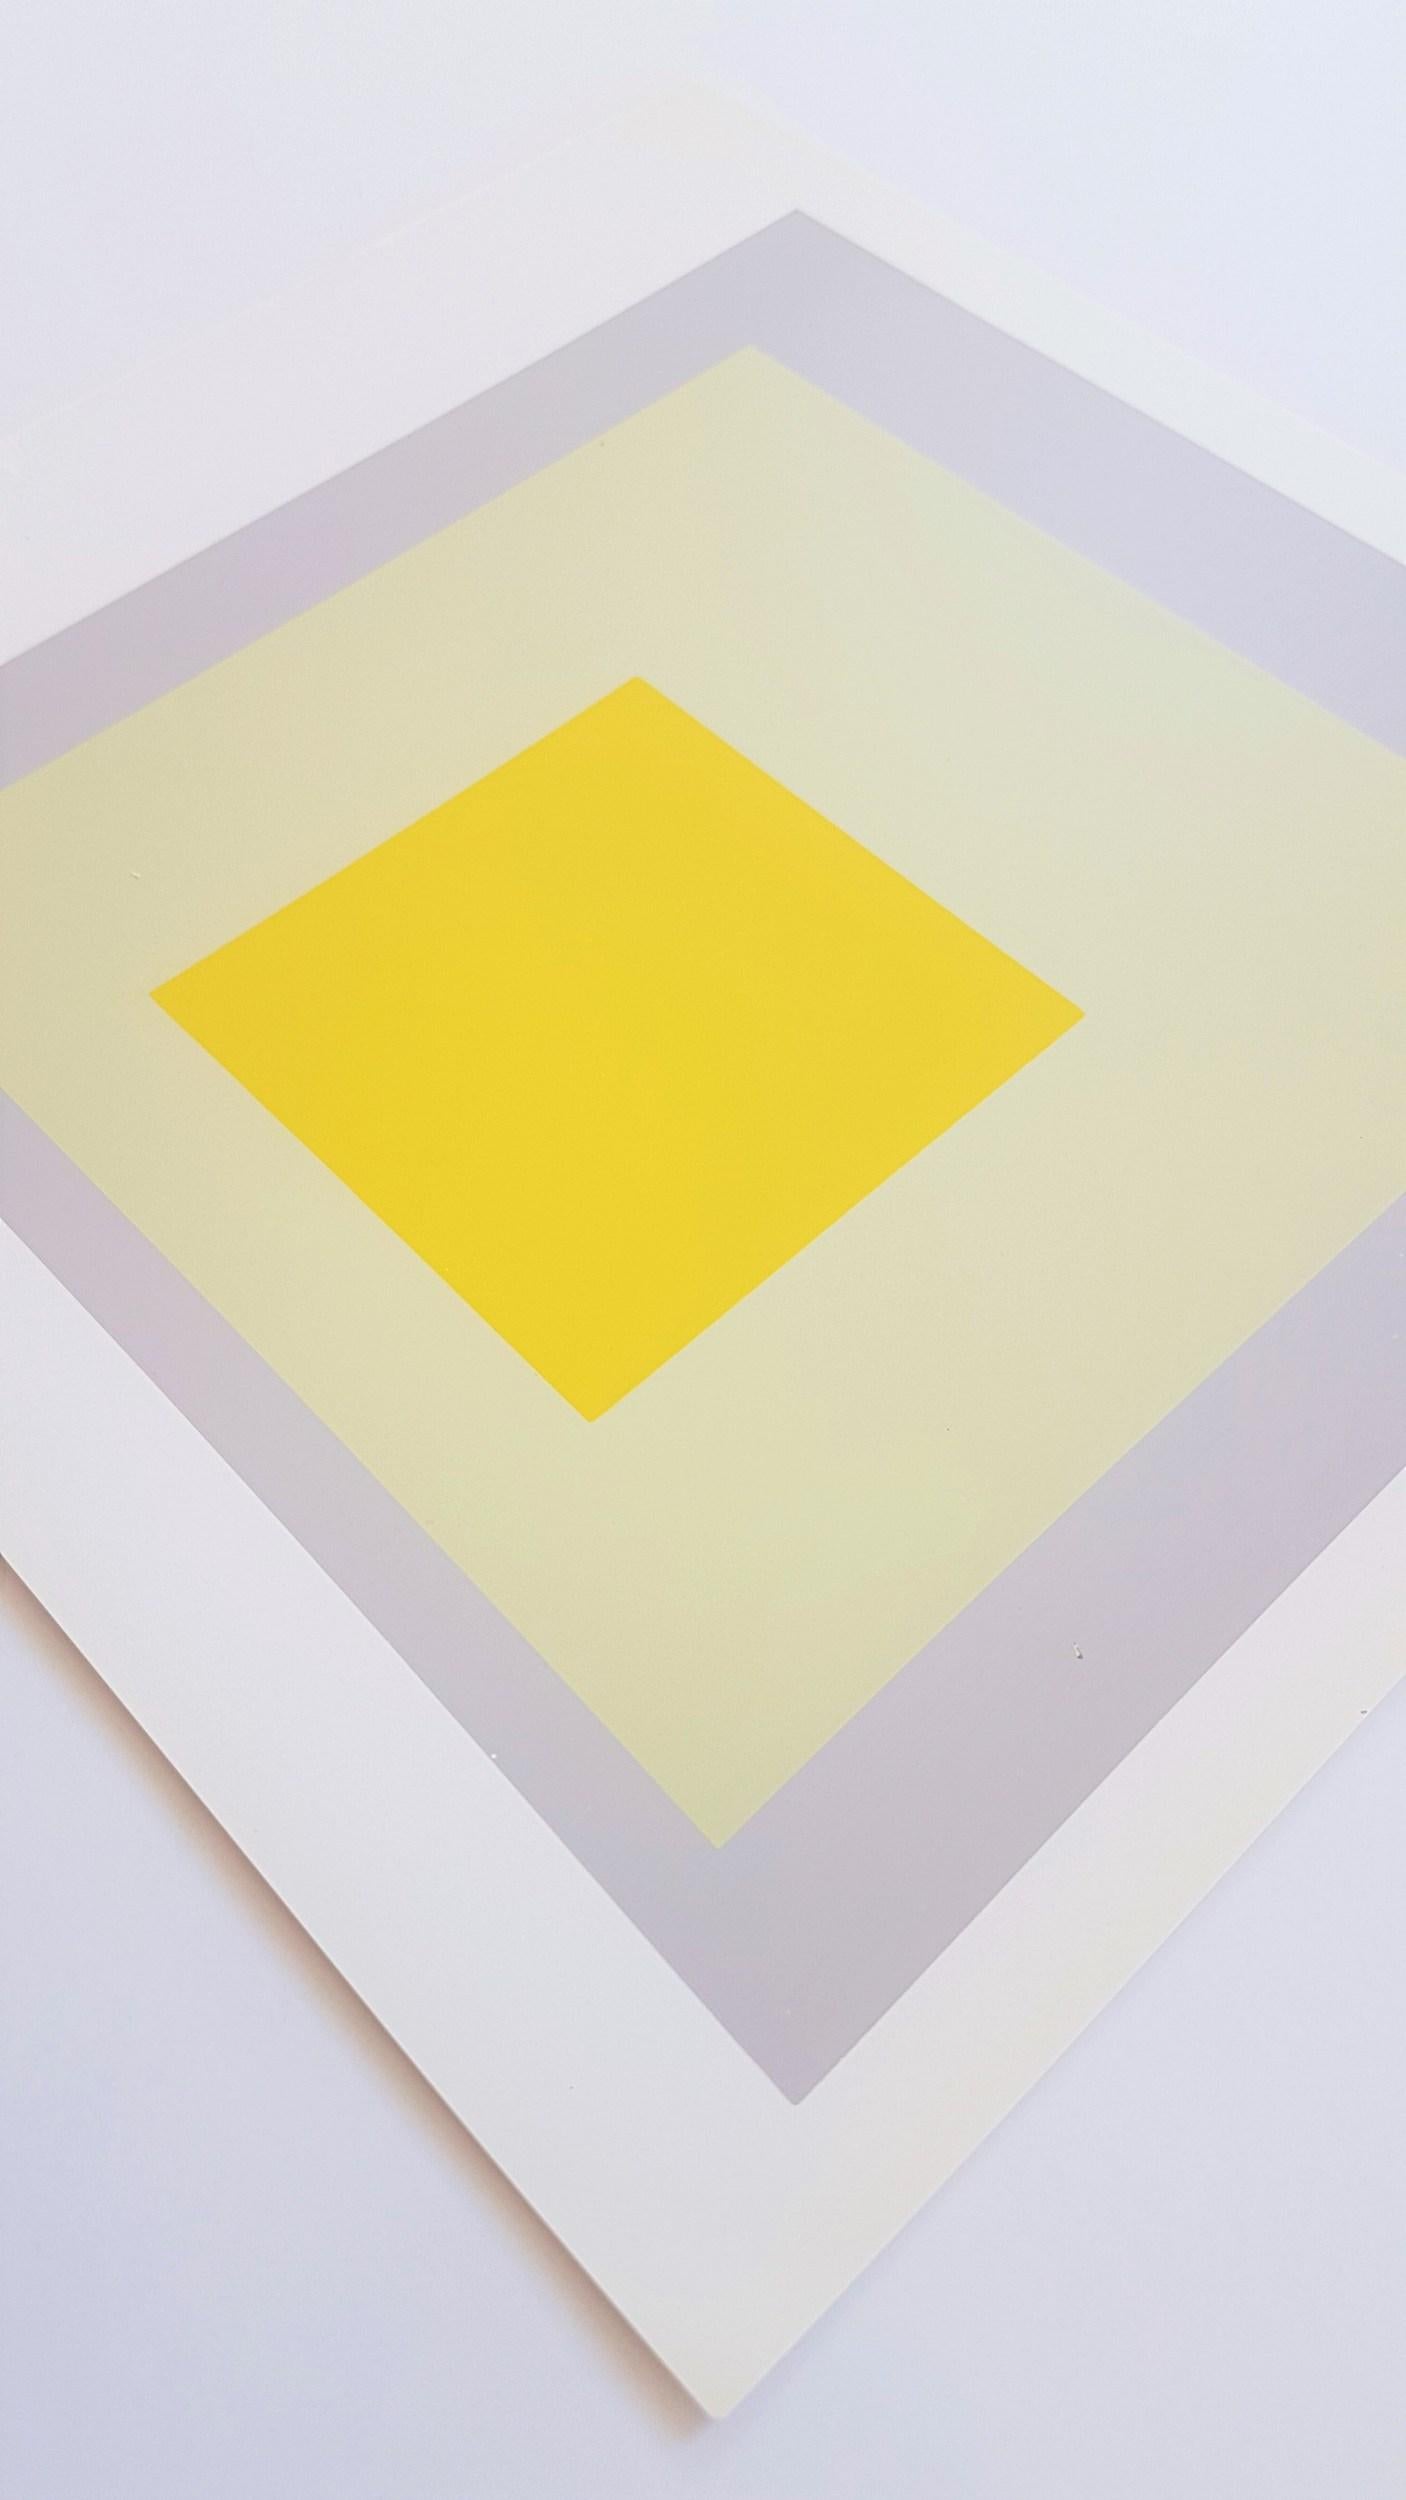 Homage to the Square - SET OF FIVE (Minimalism, Bauhaus, ~49% OFF LIST PRICE) - Minimalist Print by (after) Josef Albers